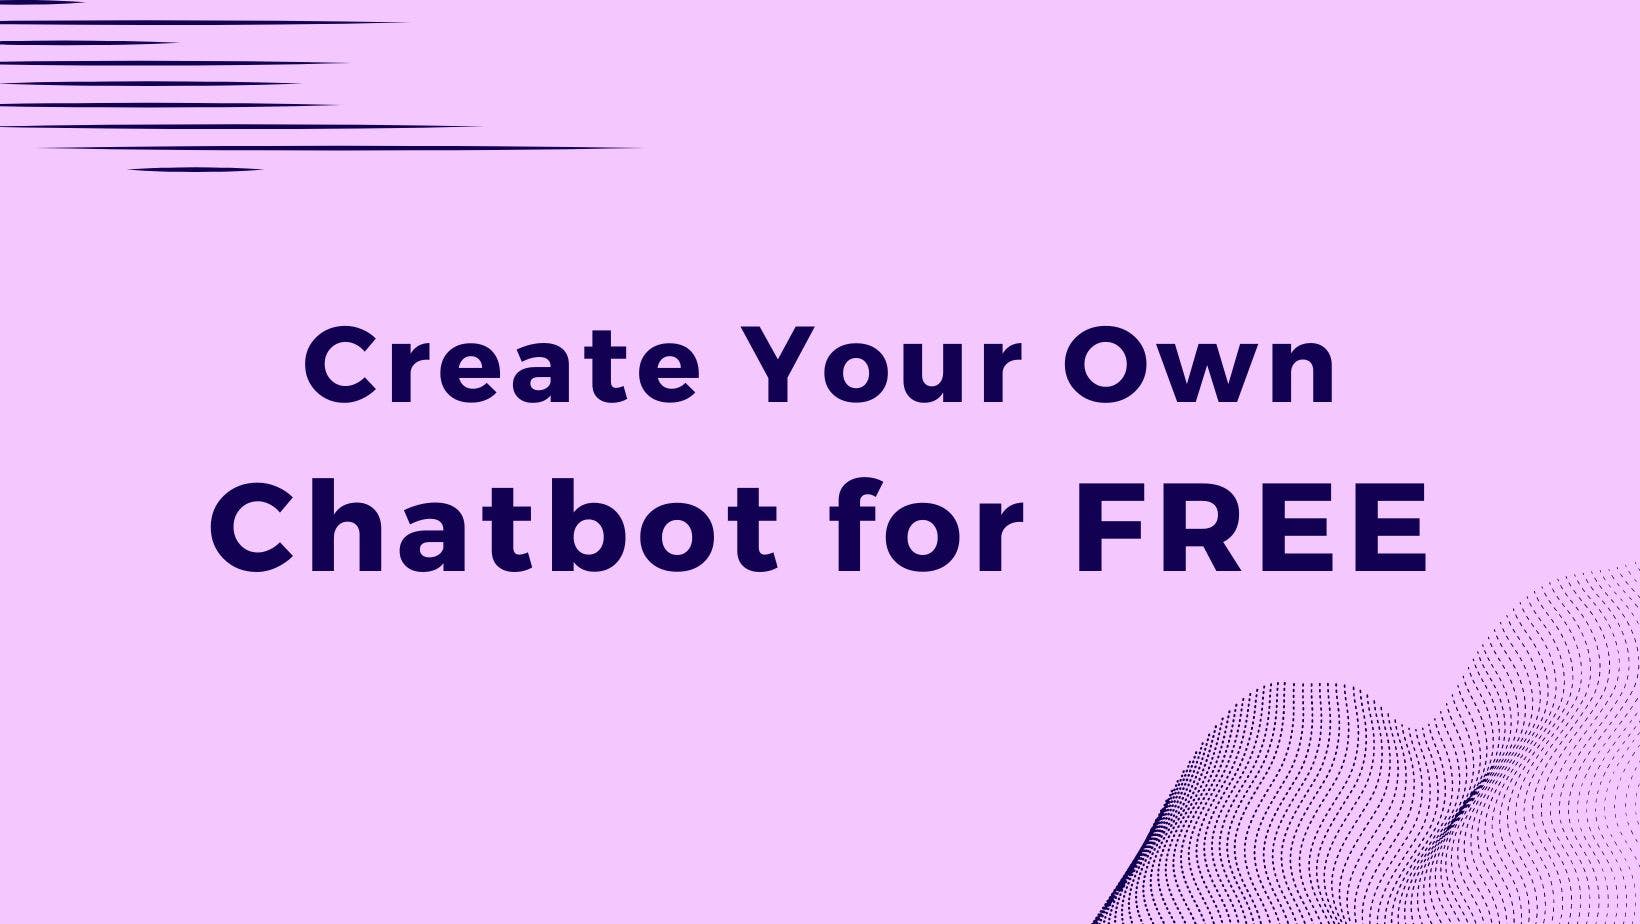 Cover Image for How to make your own chatbot with Merlin AI for FREE